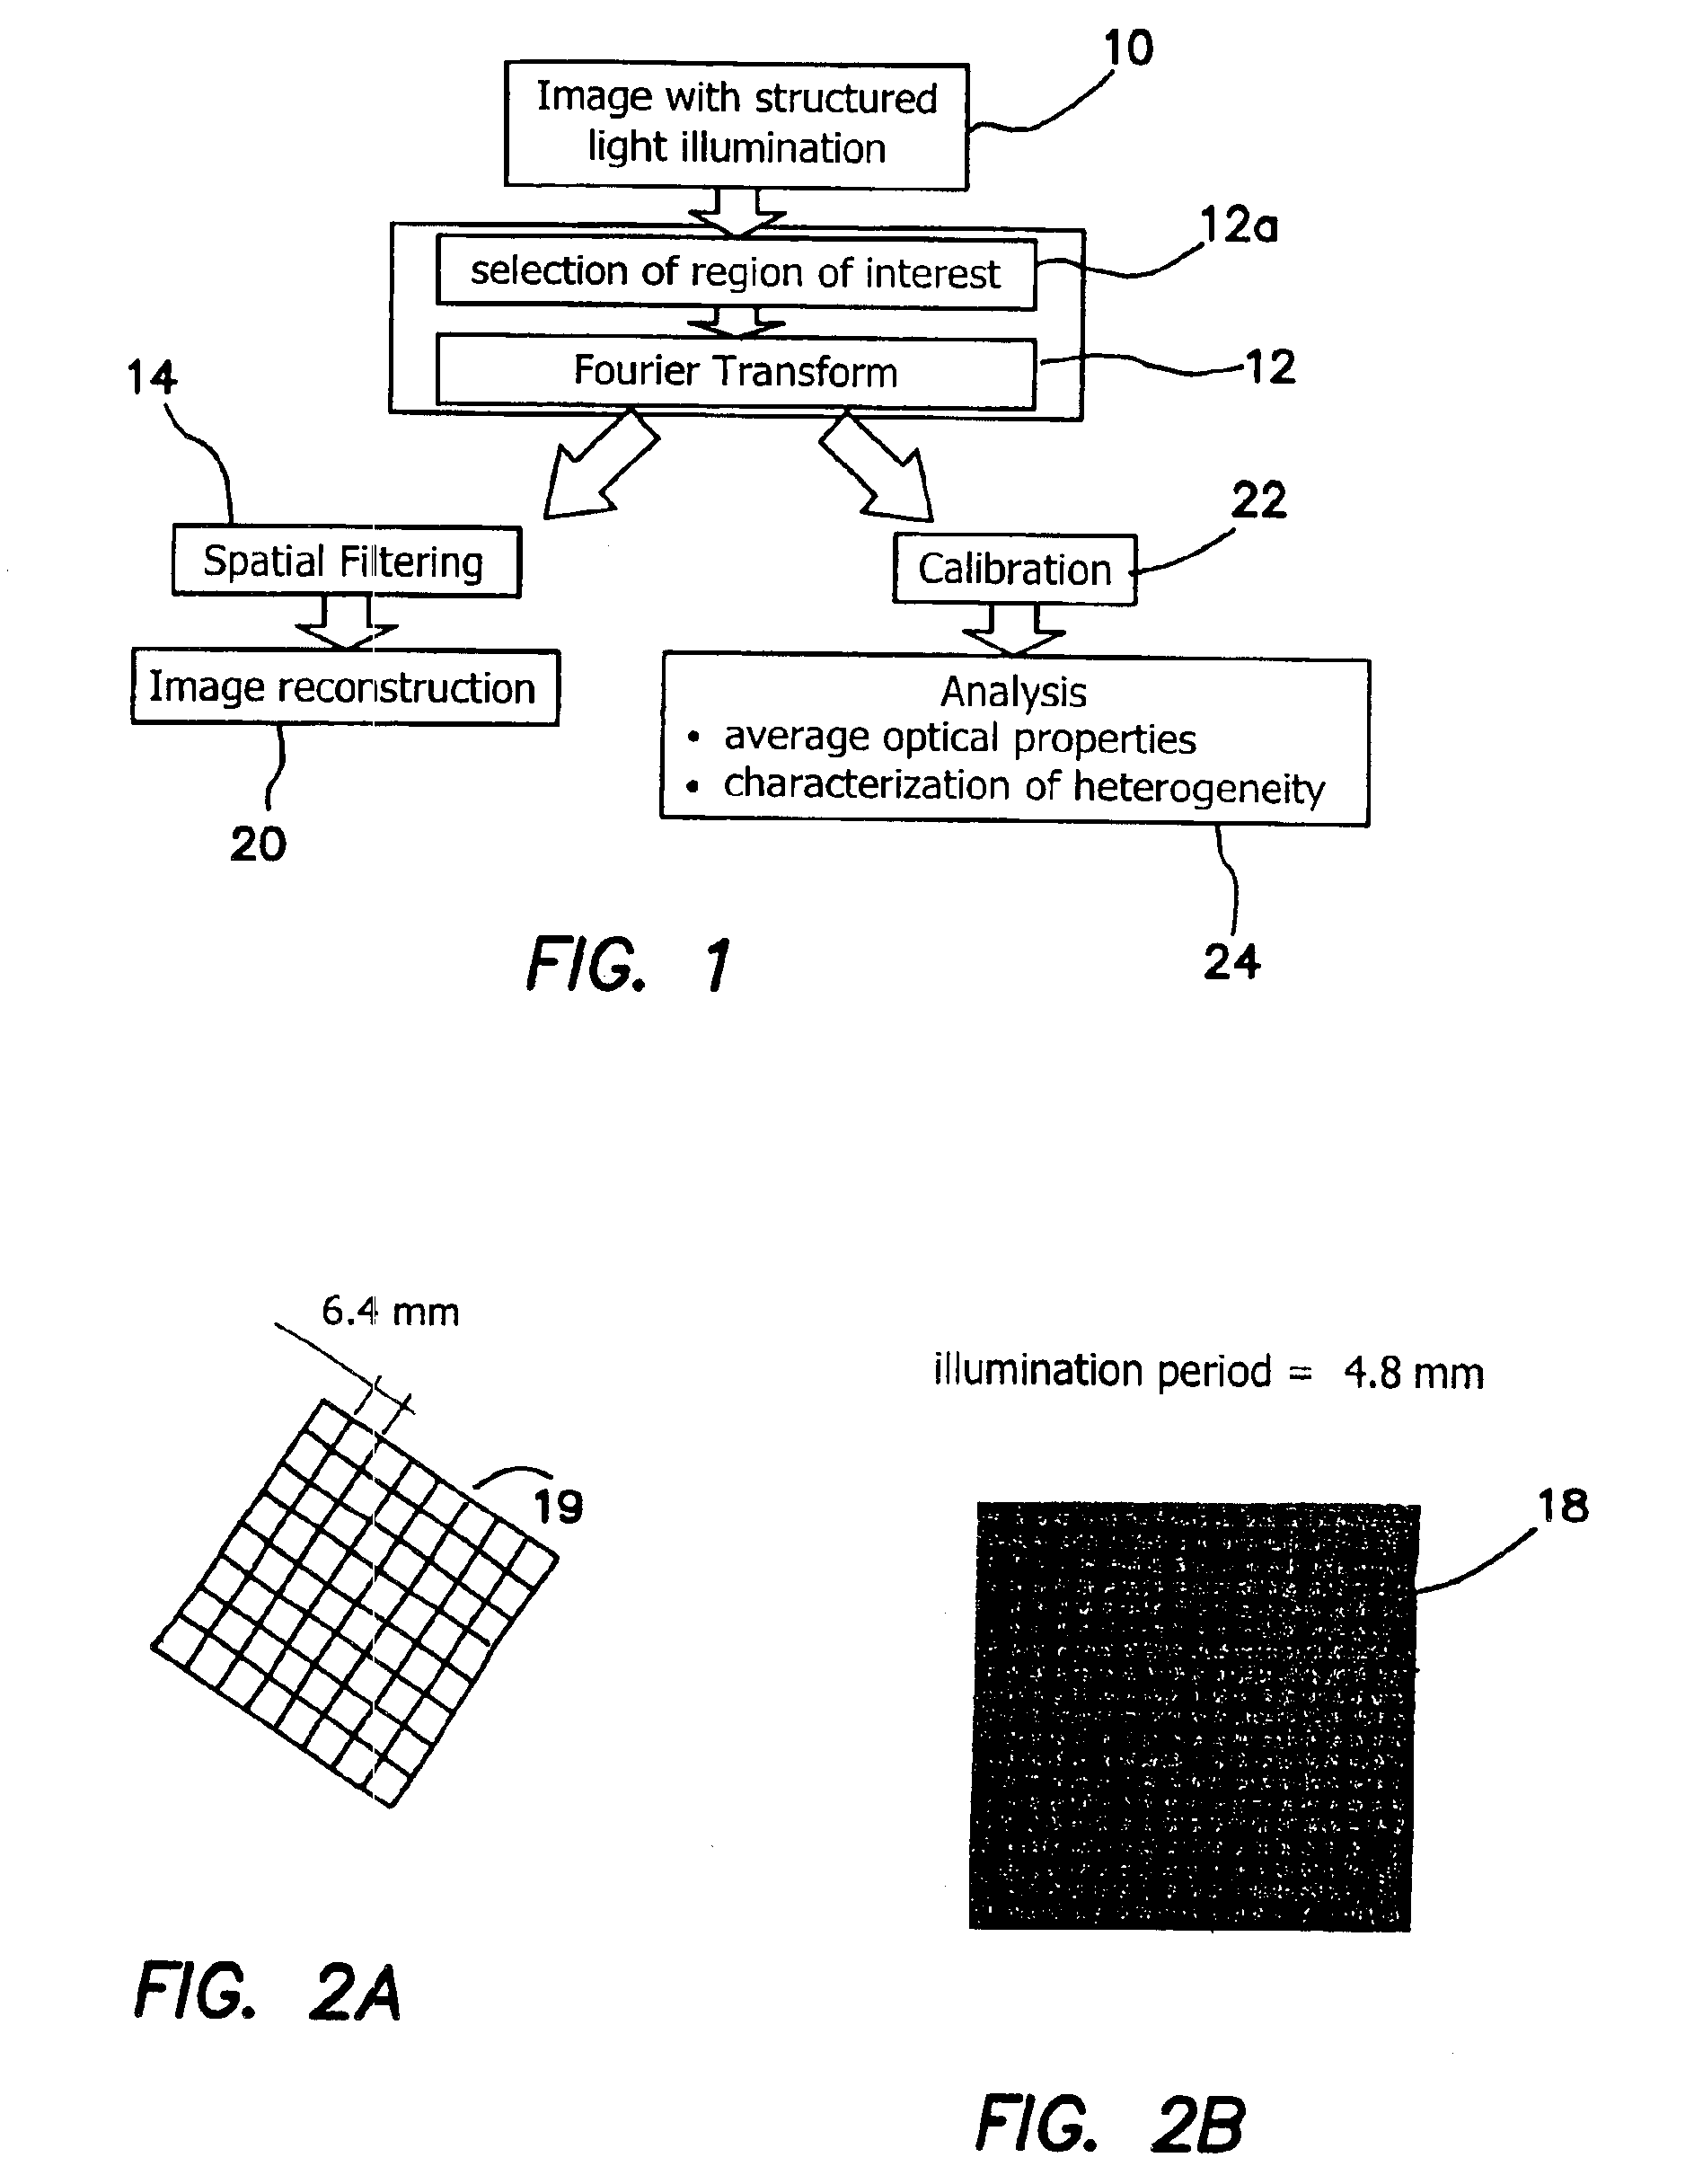 Method and apparatus for performing quantitative analysis and imaging surfaces and subsurfaces of turbid media using spatially structured illumination